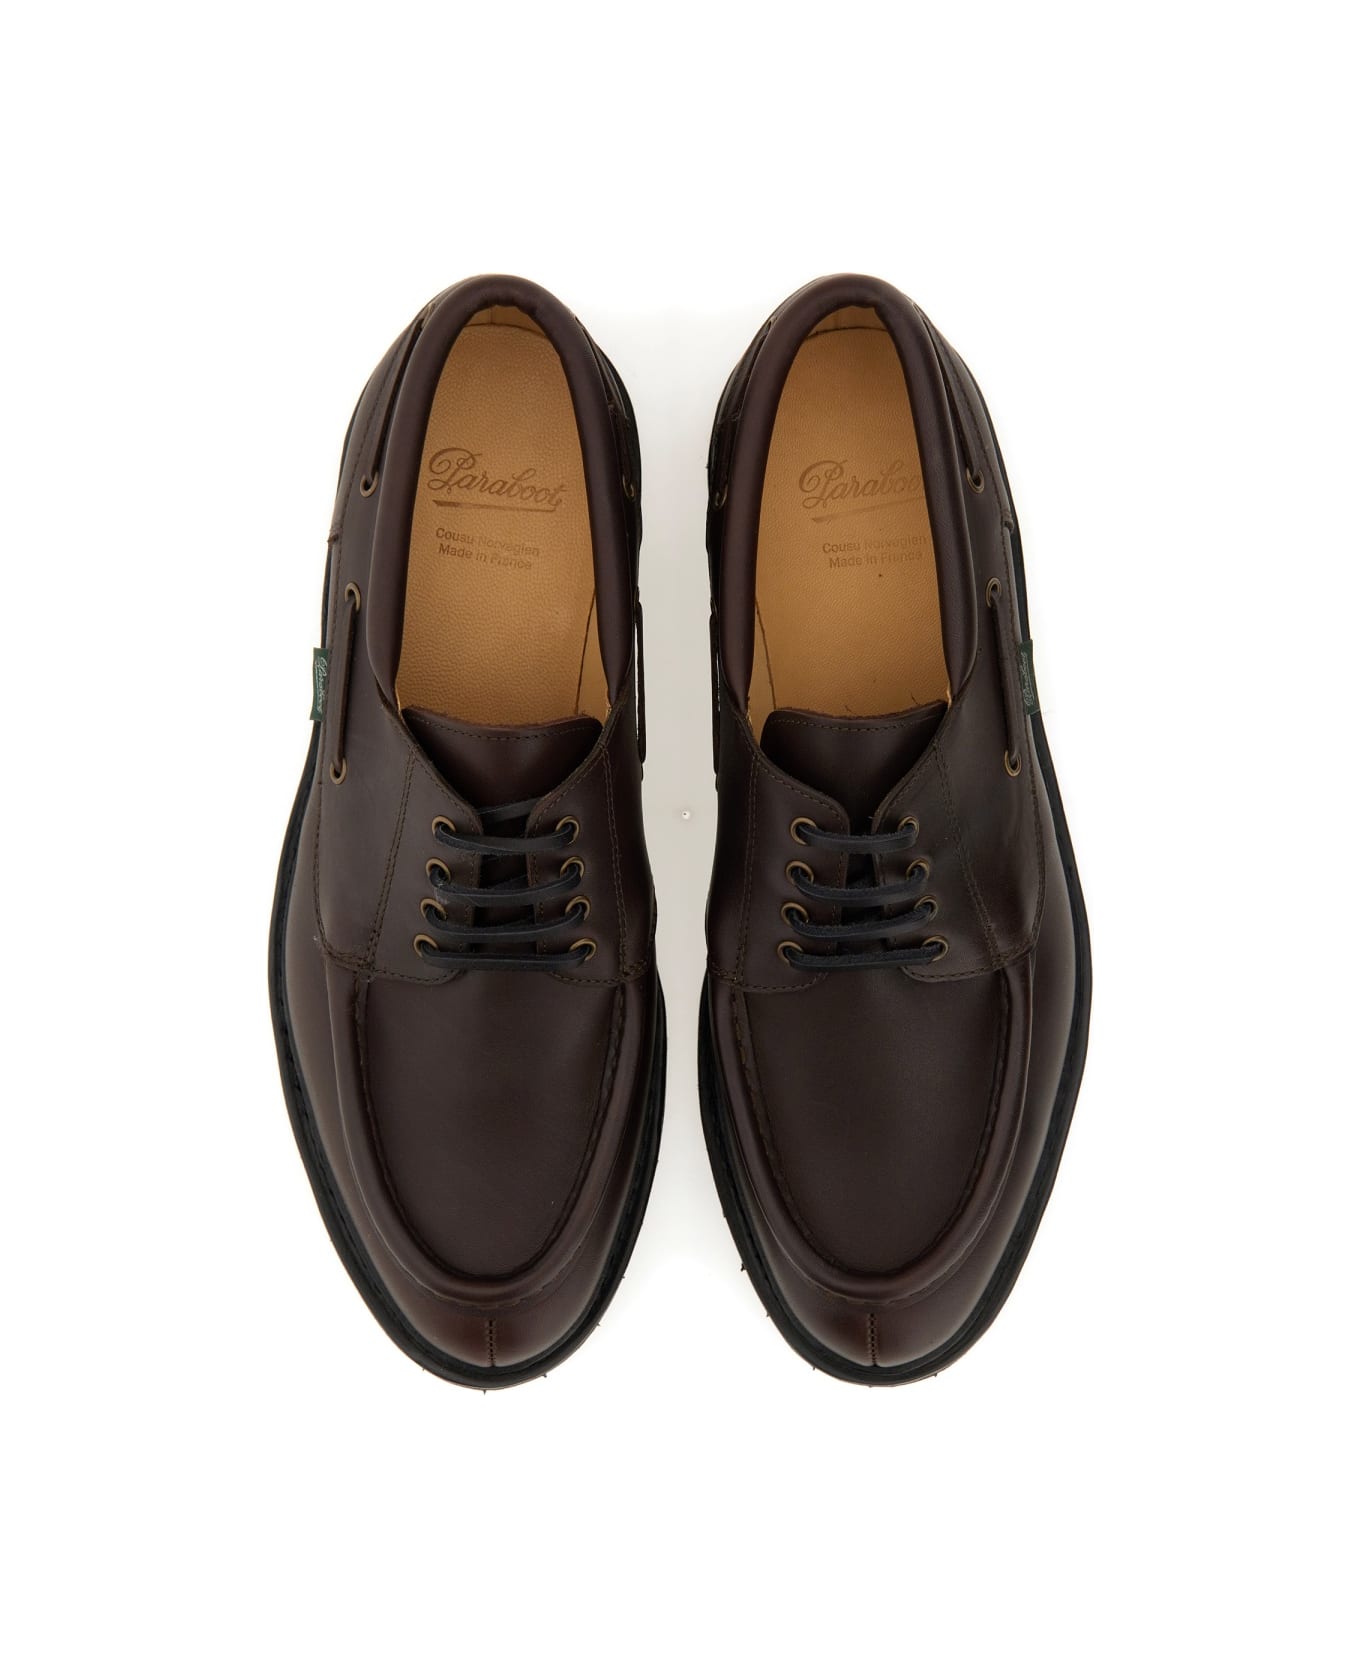 Paraboot Chimey Loafer - BROWN ローファー＆デッキシューズ